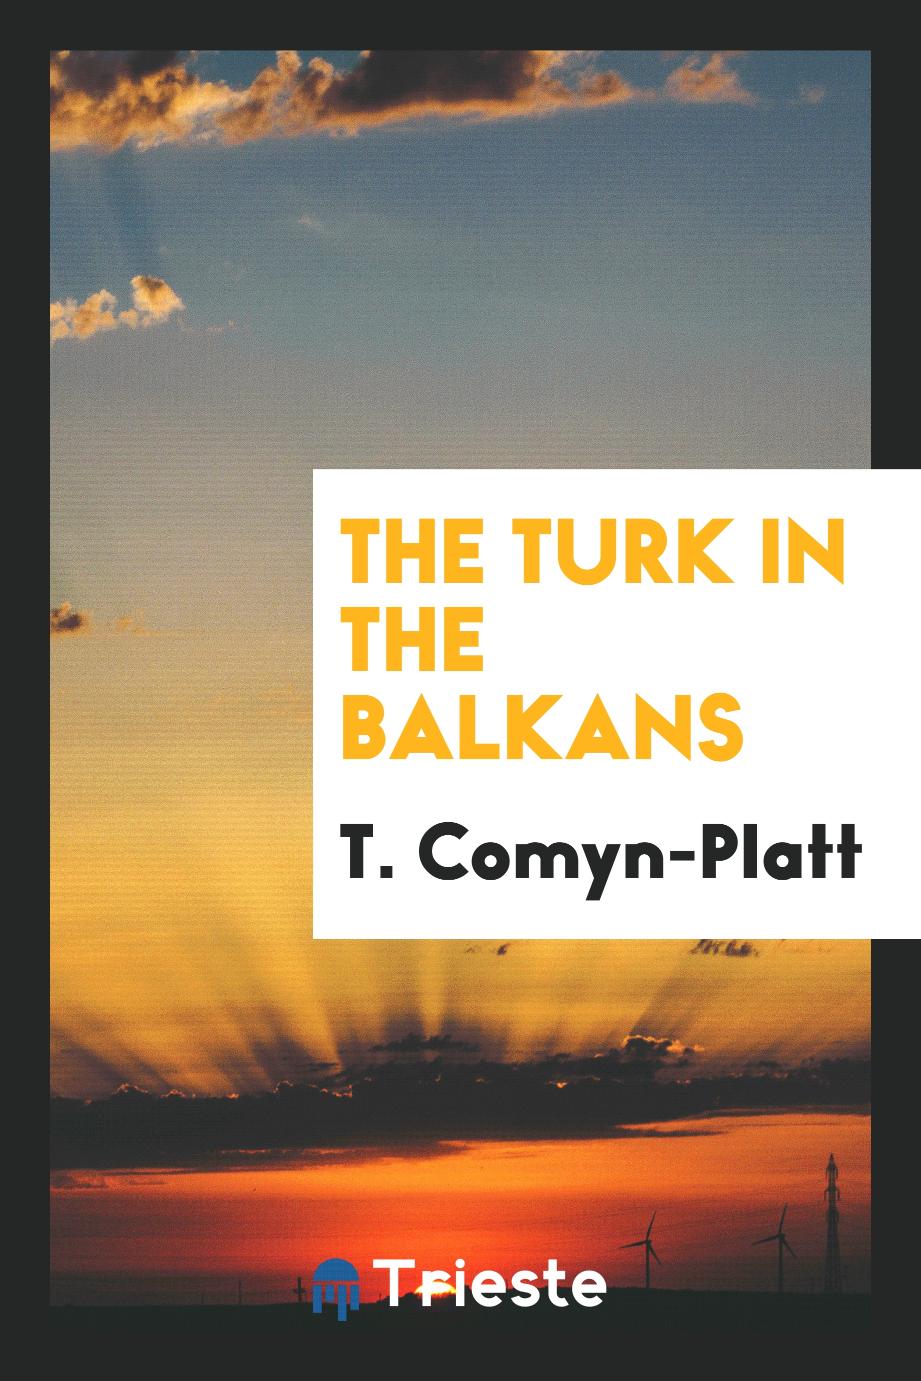 The Turk in the Balkans